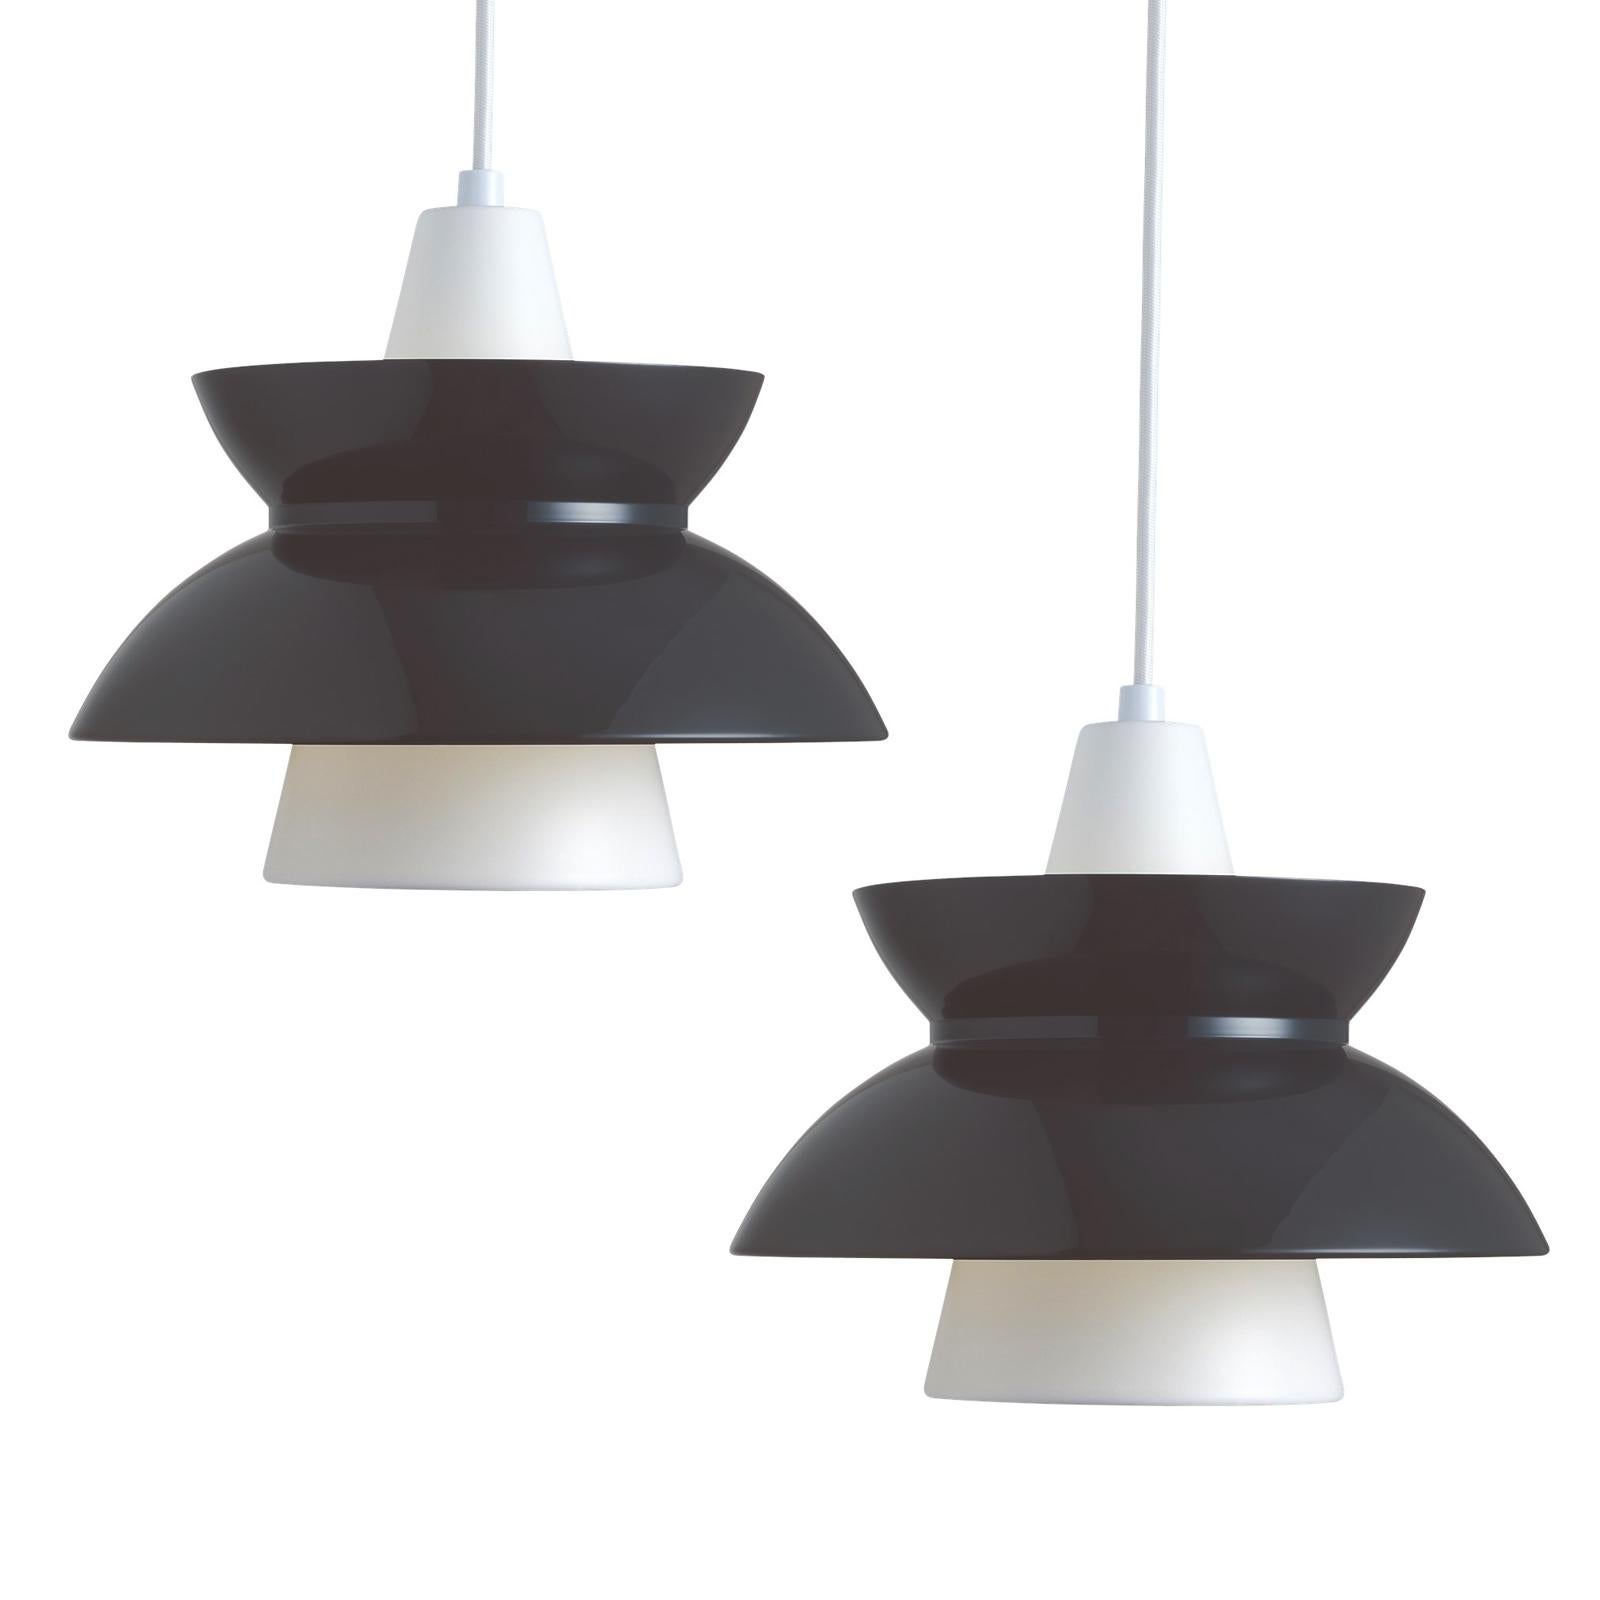 Jørn Utzon 'Doo-Wop' pendant for Louis Poulsen in dark gray. Designed in the 1950s and re-editioned in 2016. Available in both white and dark gray. 

Price is per item. 

Originally introduced in the 1950s, the Doo-Wop pendant light was designed